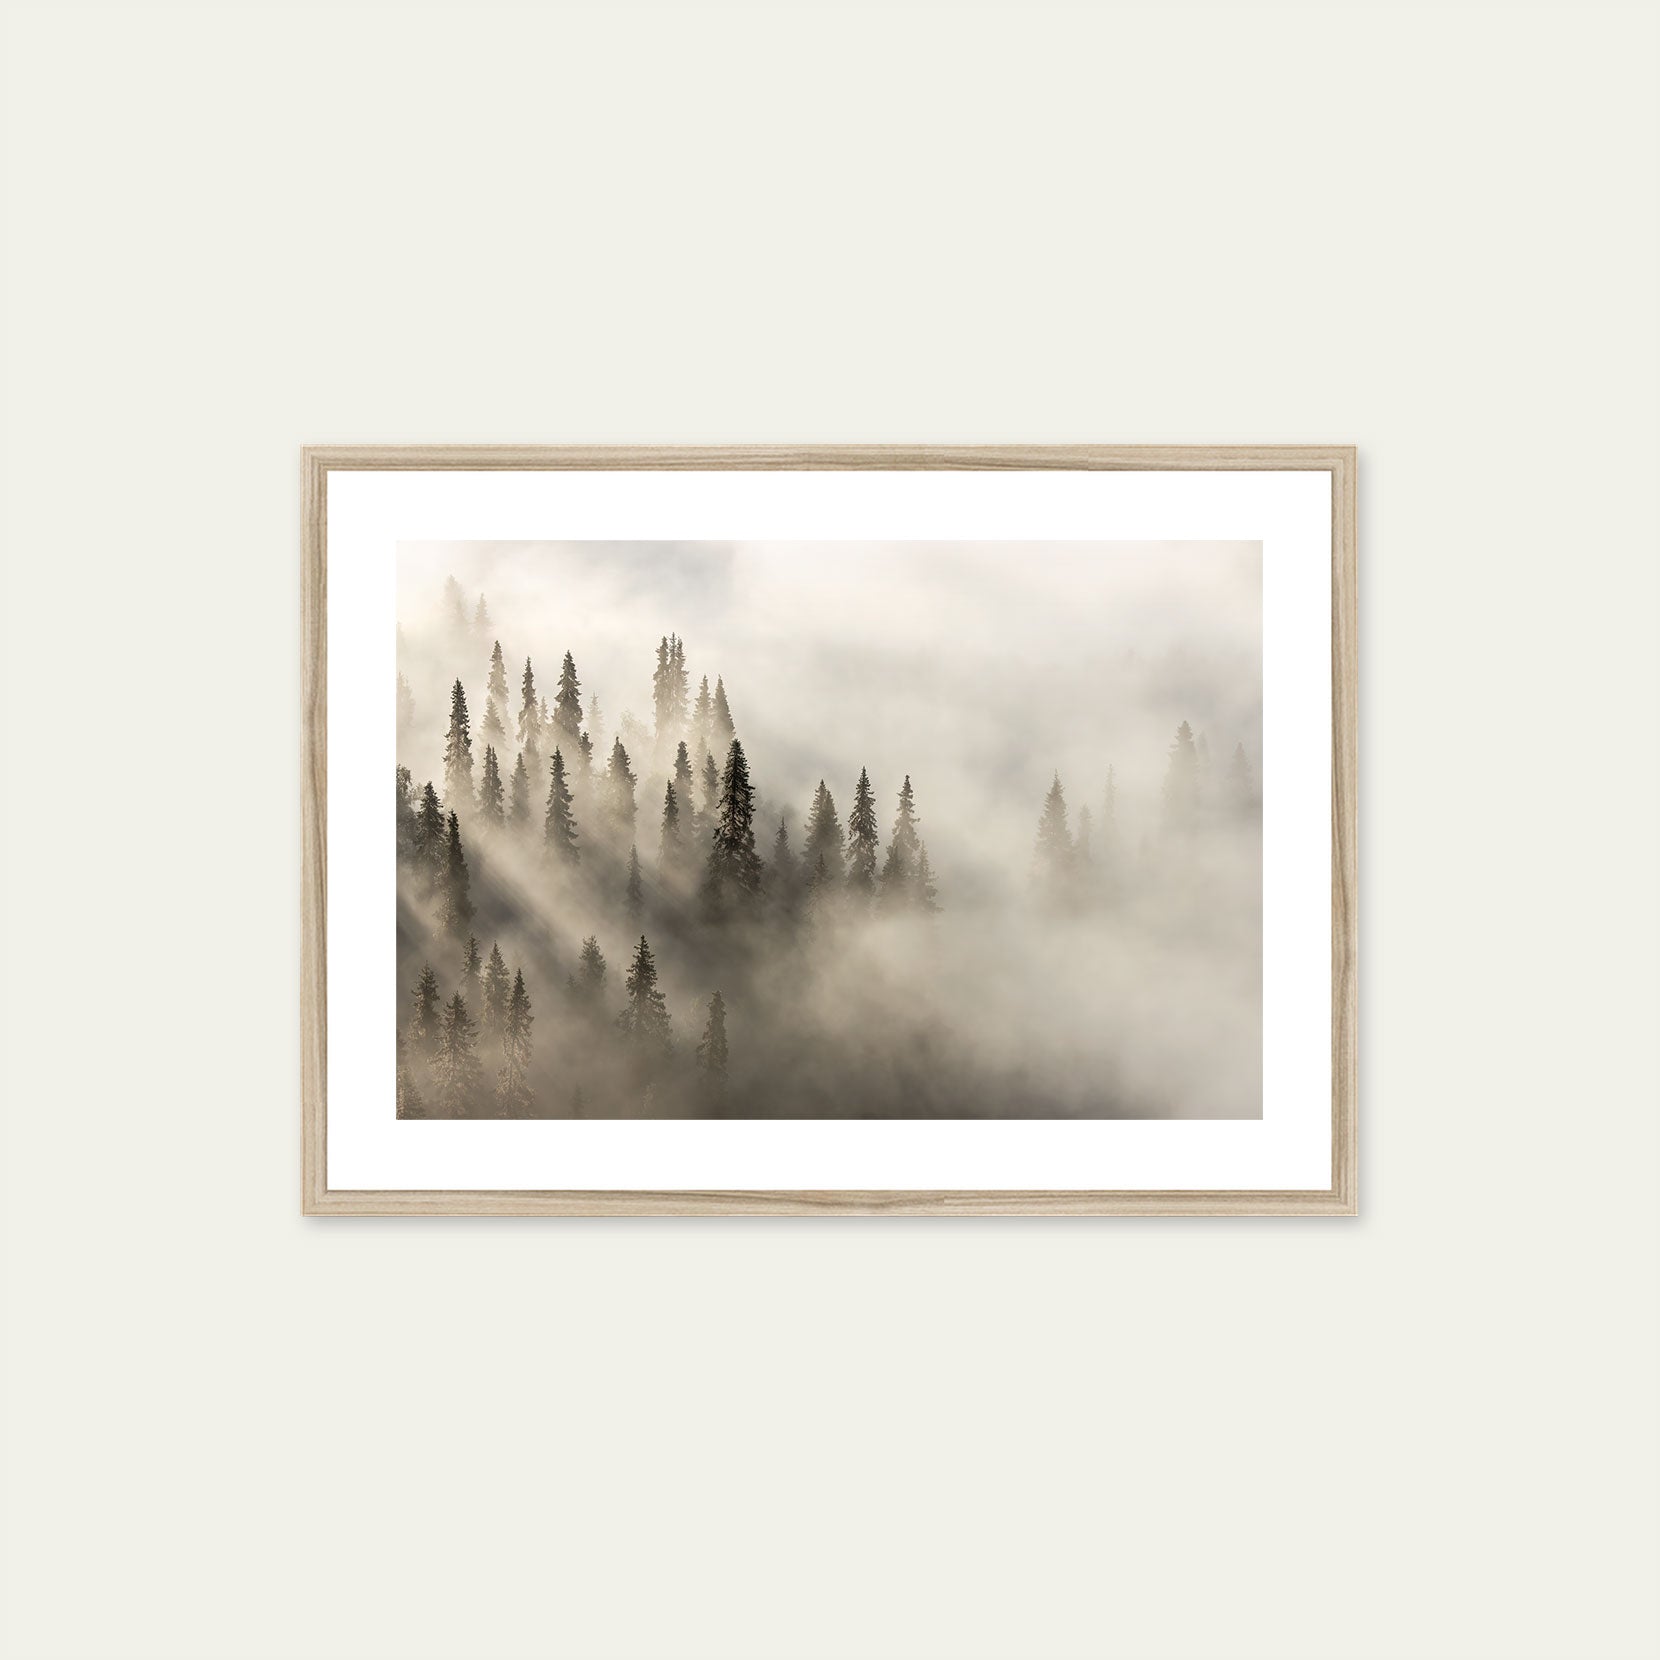 A wood framed print of a fog covered forest at dawn